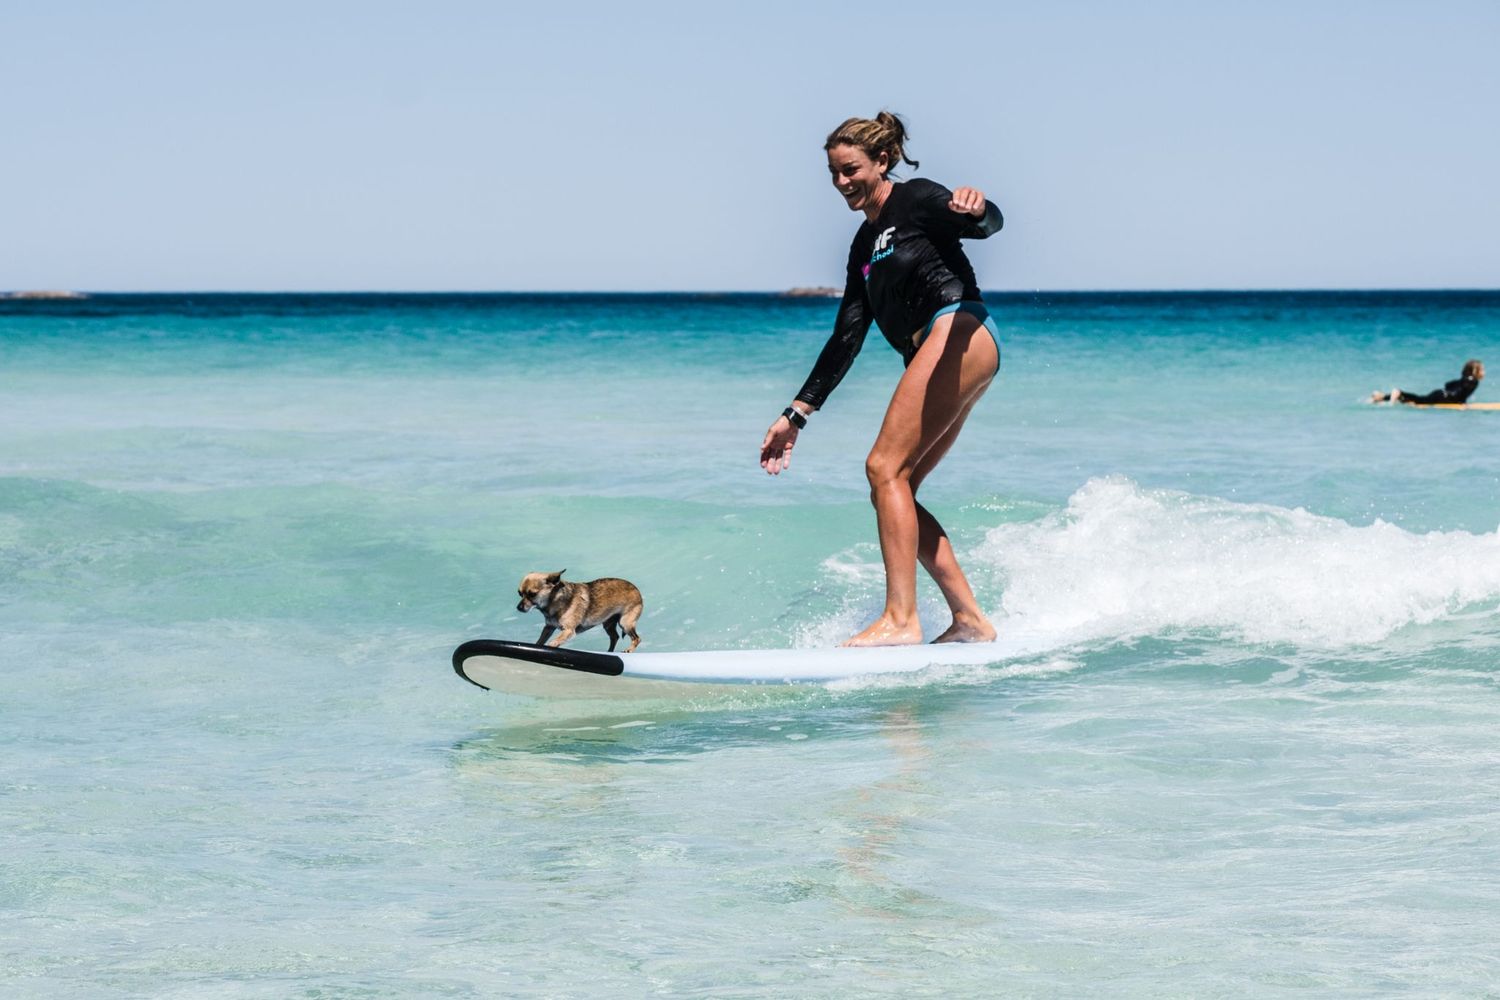 Crystal from Yallingup Surf School surfing with her dog at Smiths Beach. Credit Rachel Claire.